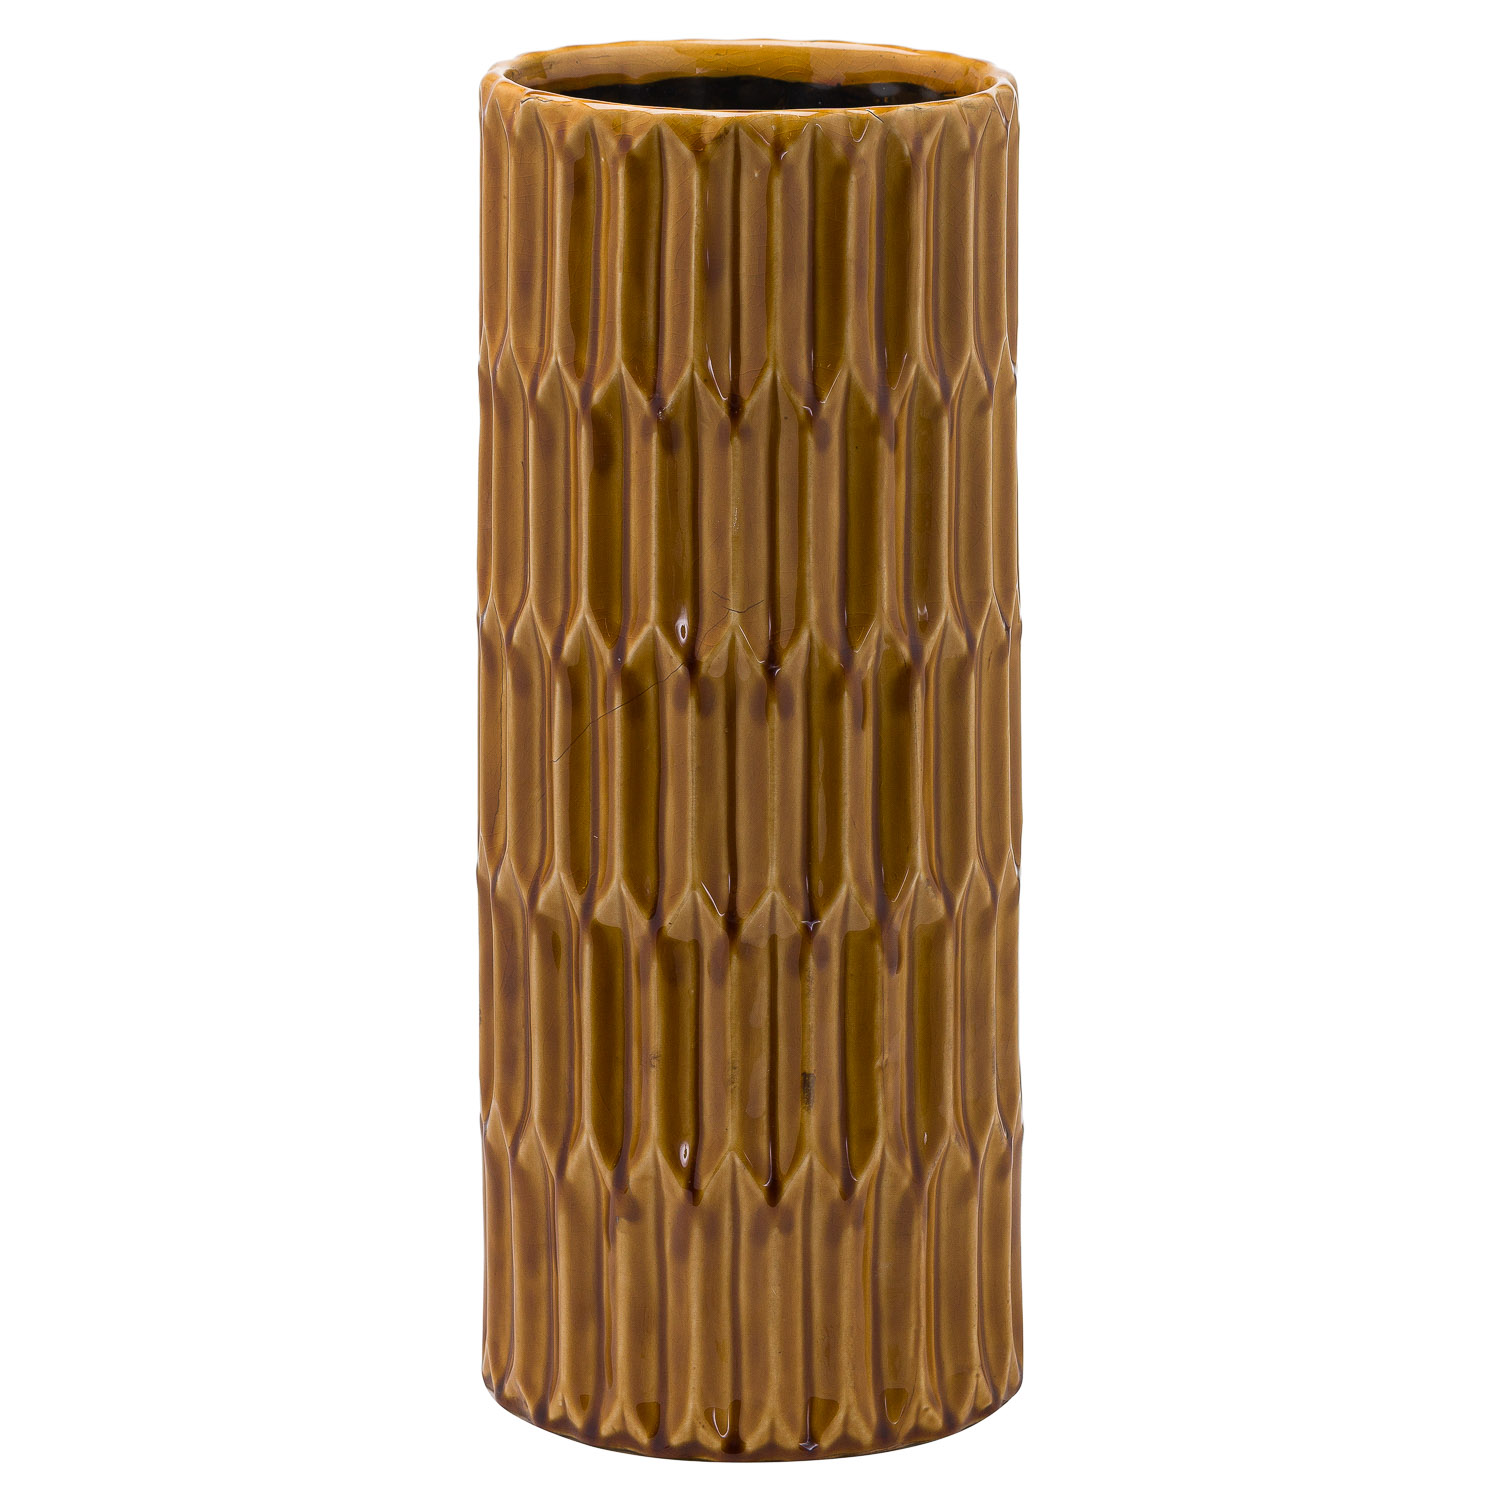 Seville Collection Lustre Umbrella Stand - Image 1